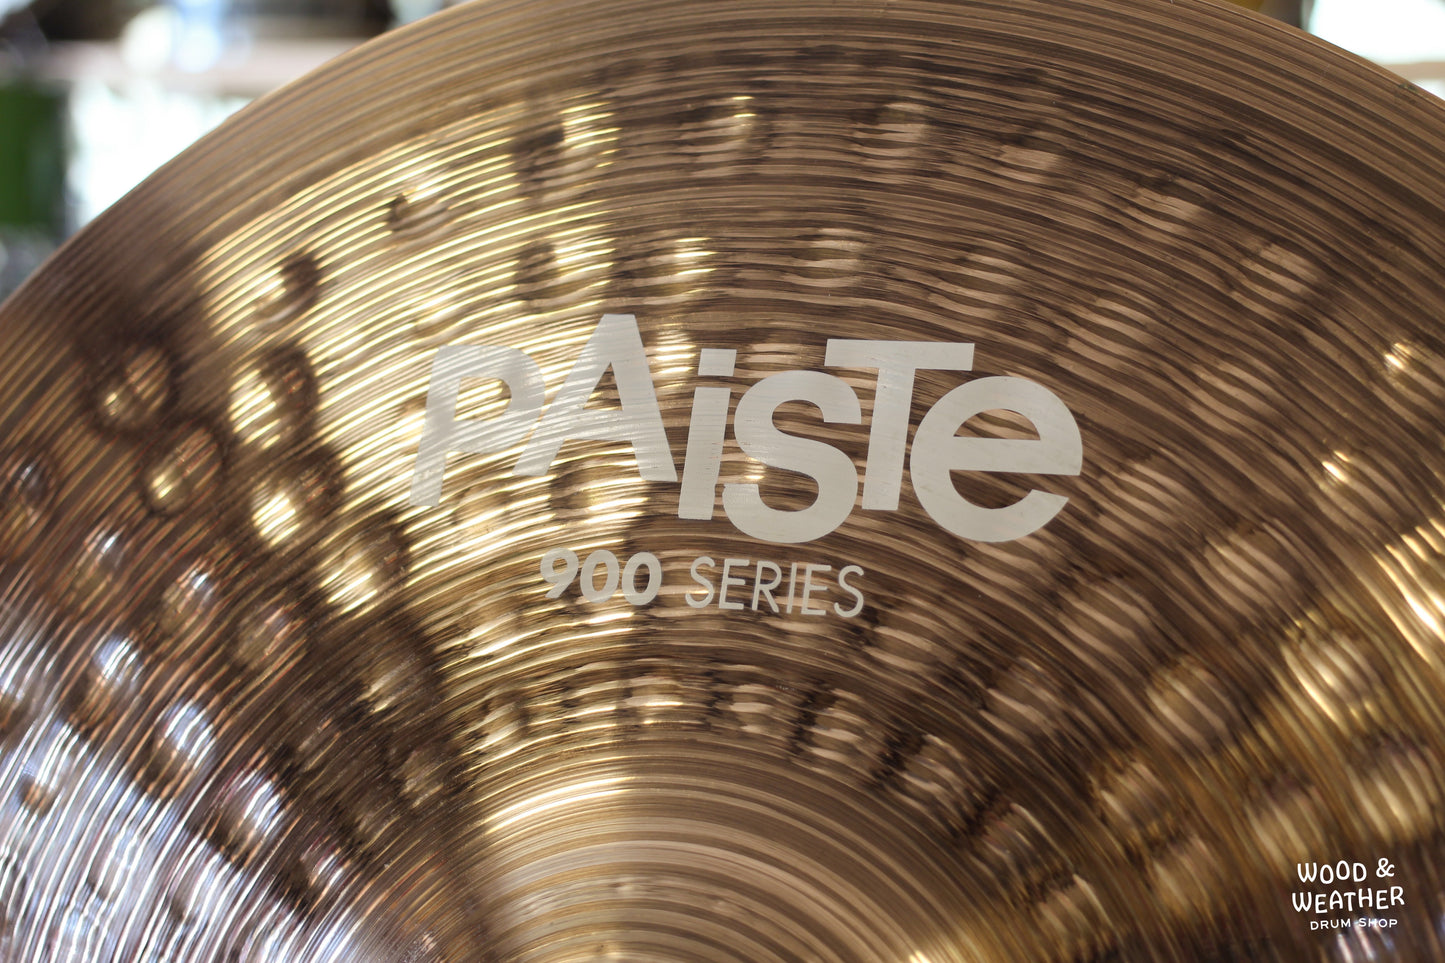 Used Paiste 24" 900 Series Mega Bell Ride Cymbal 4128g